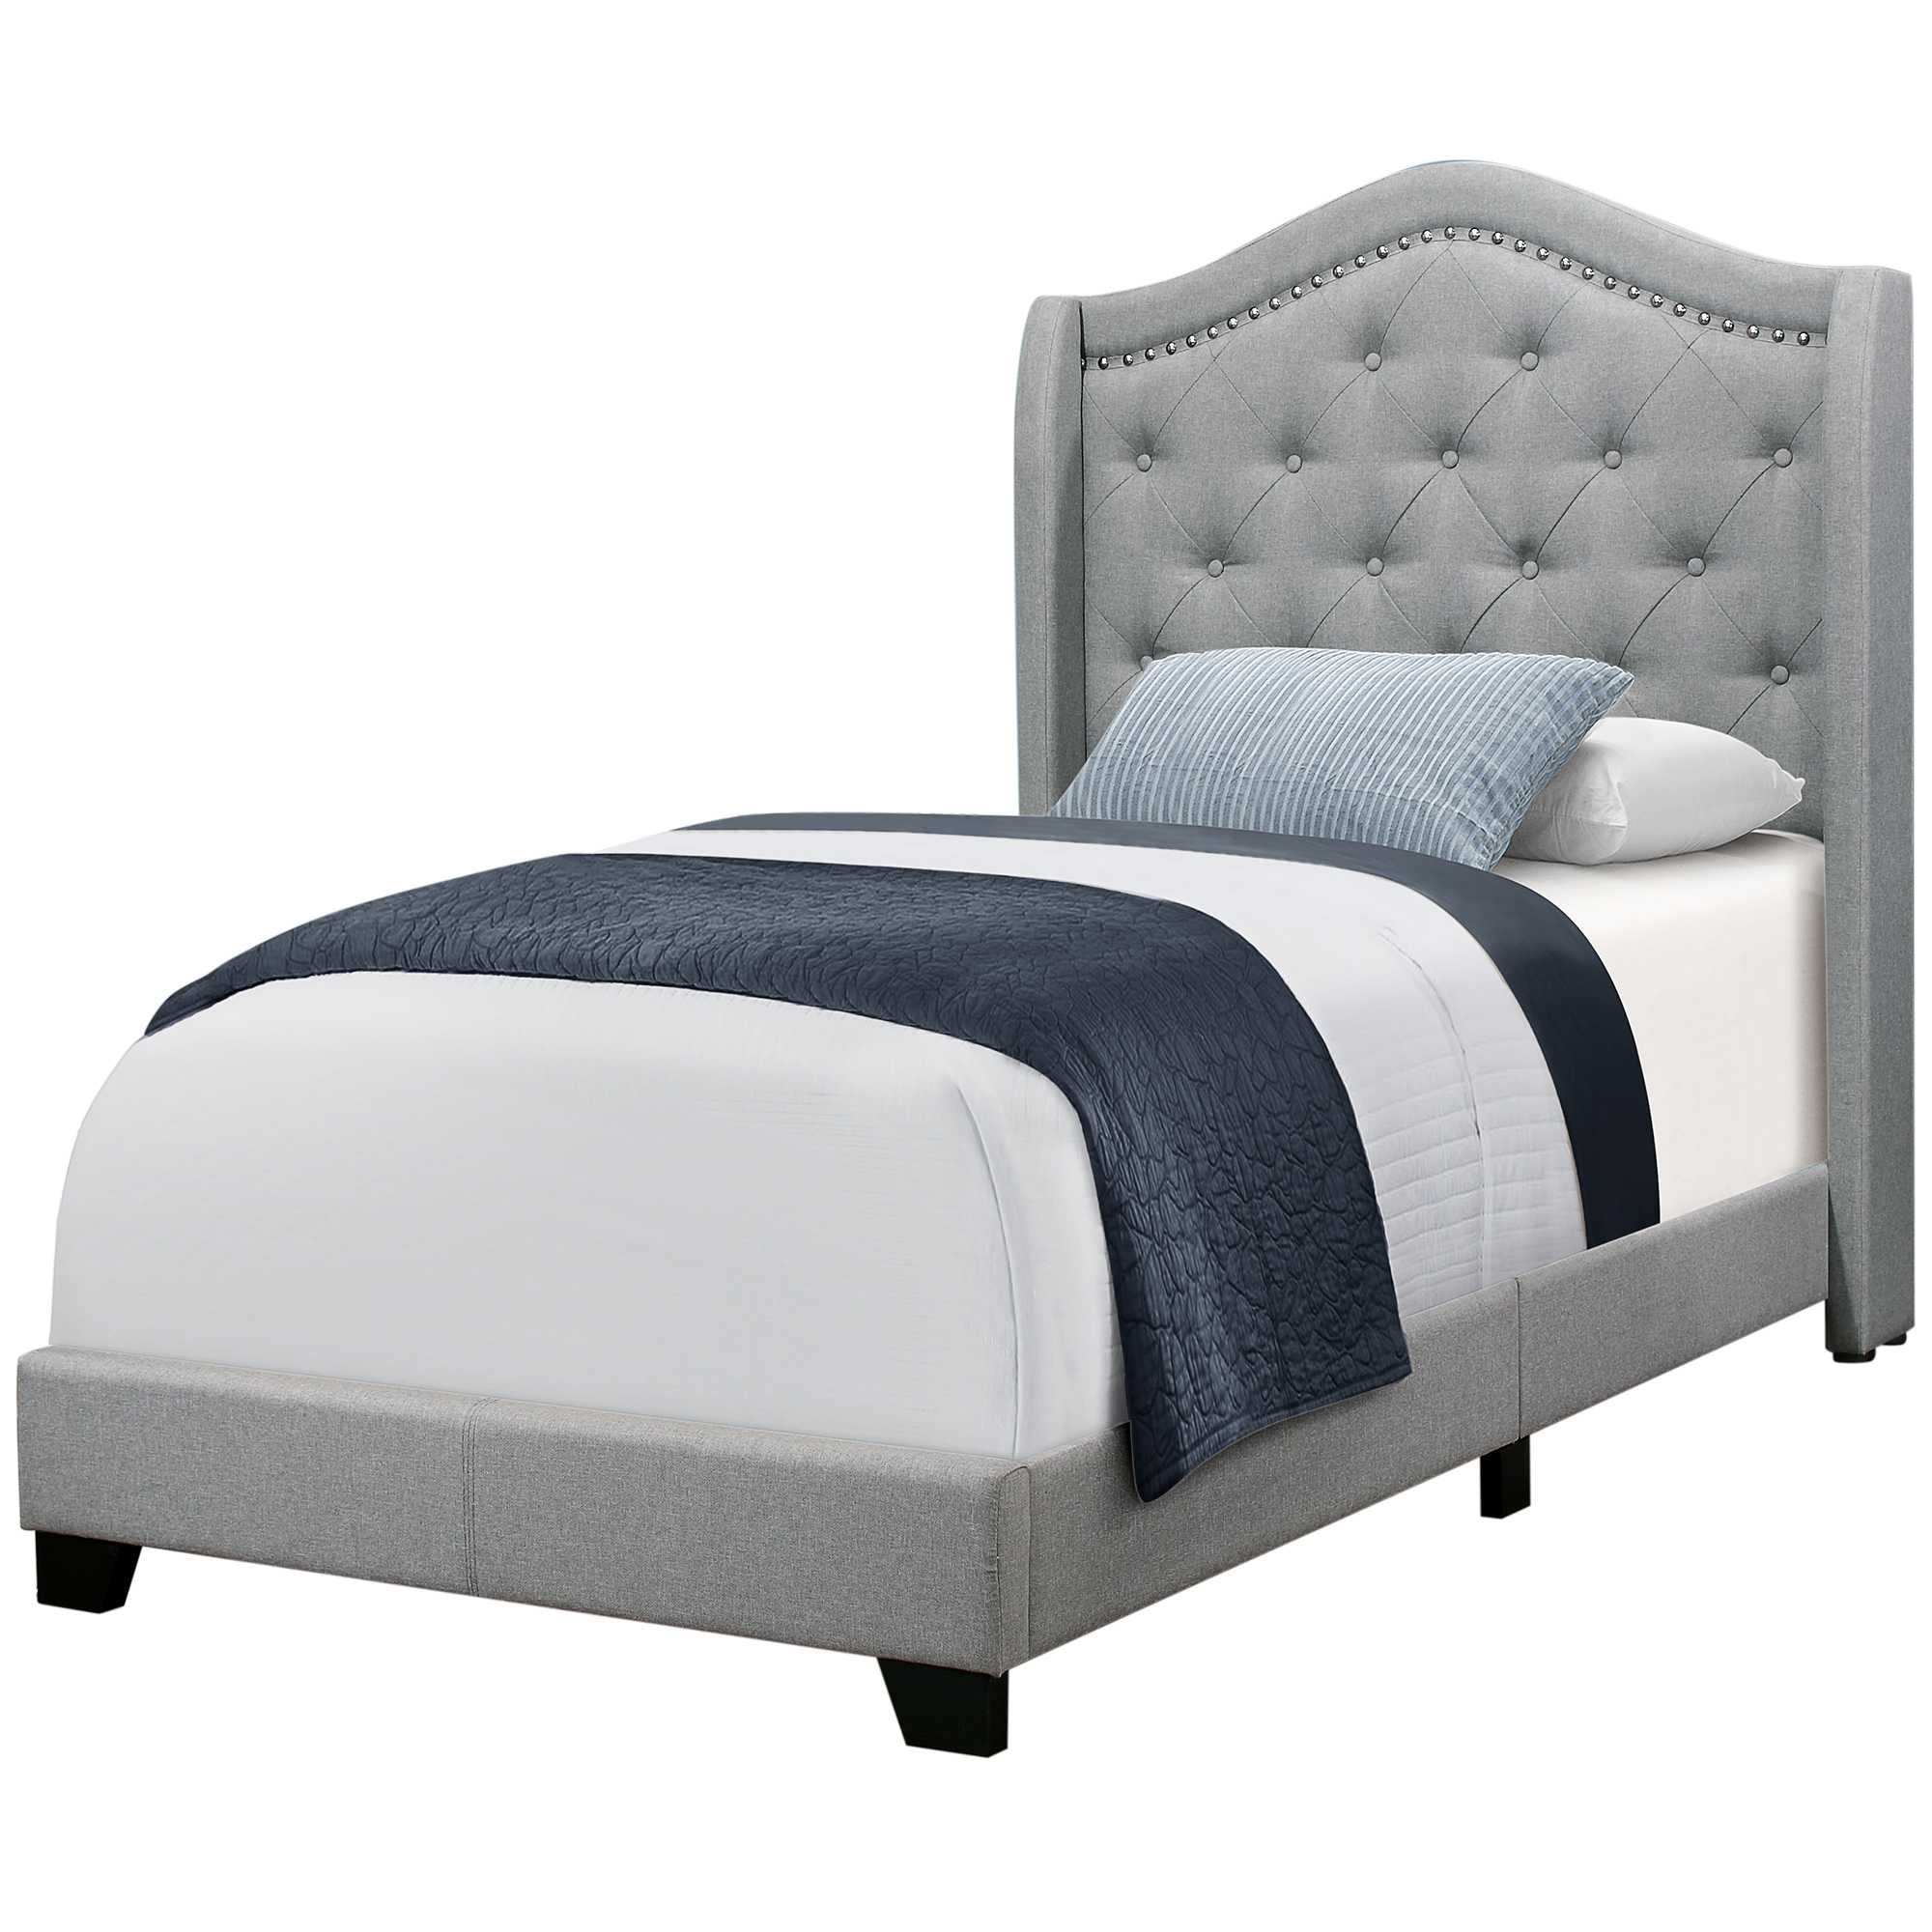 Tufted Grey Standard Bed Upholstered With Nailhead Trim And With Headboard